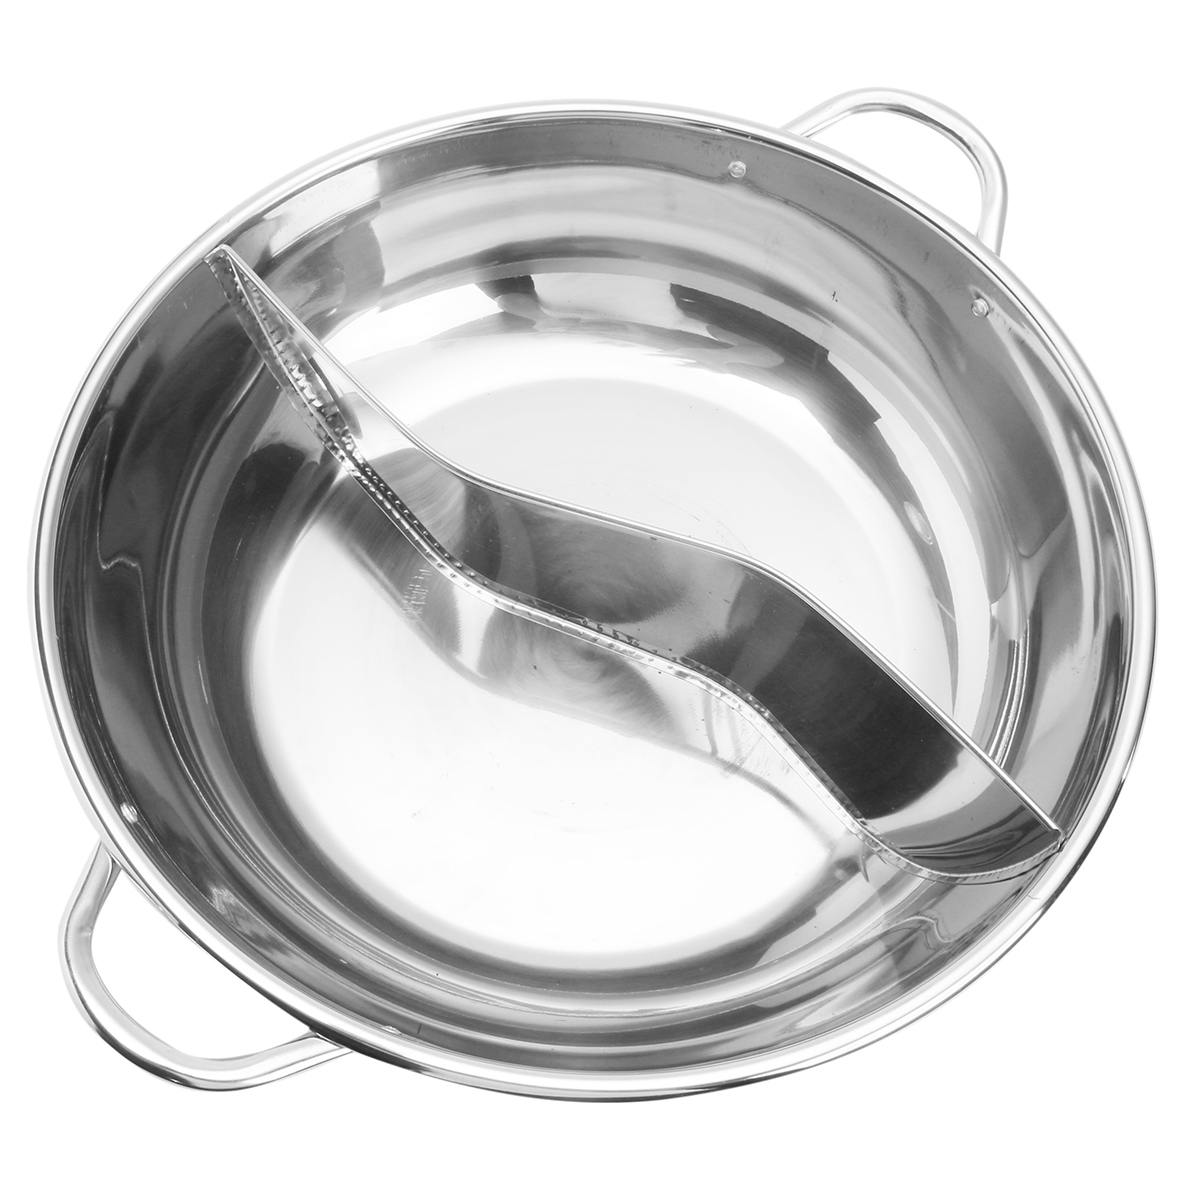 800131 STAINLESS STEEL HOT POT WITH 3 DIVISIONS-30CM 不銹鋼3 格火鍋